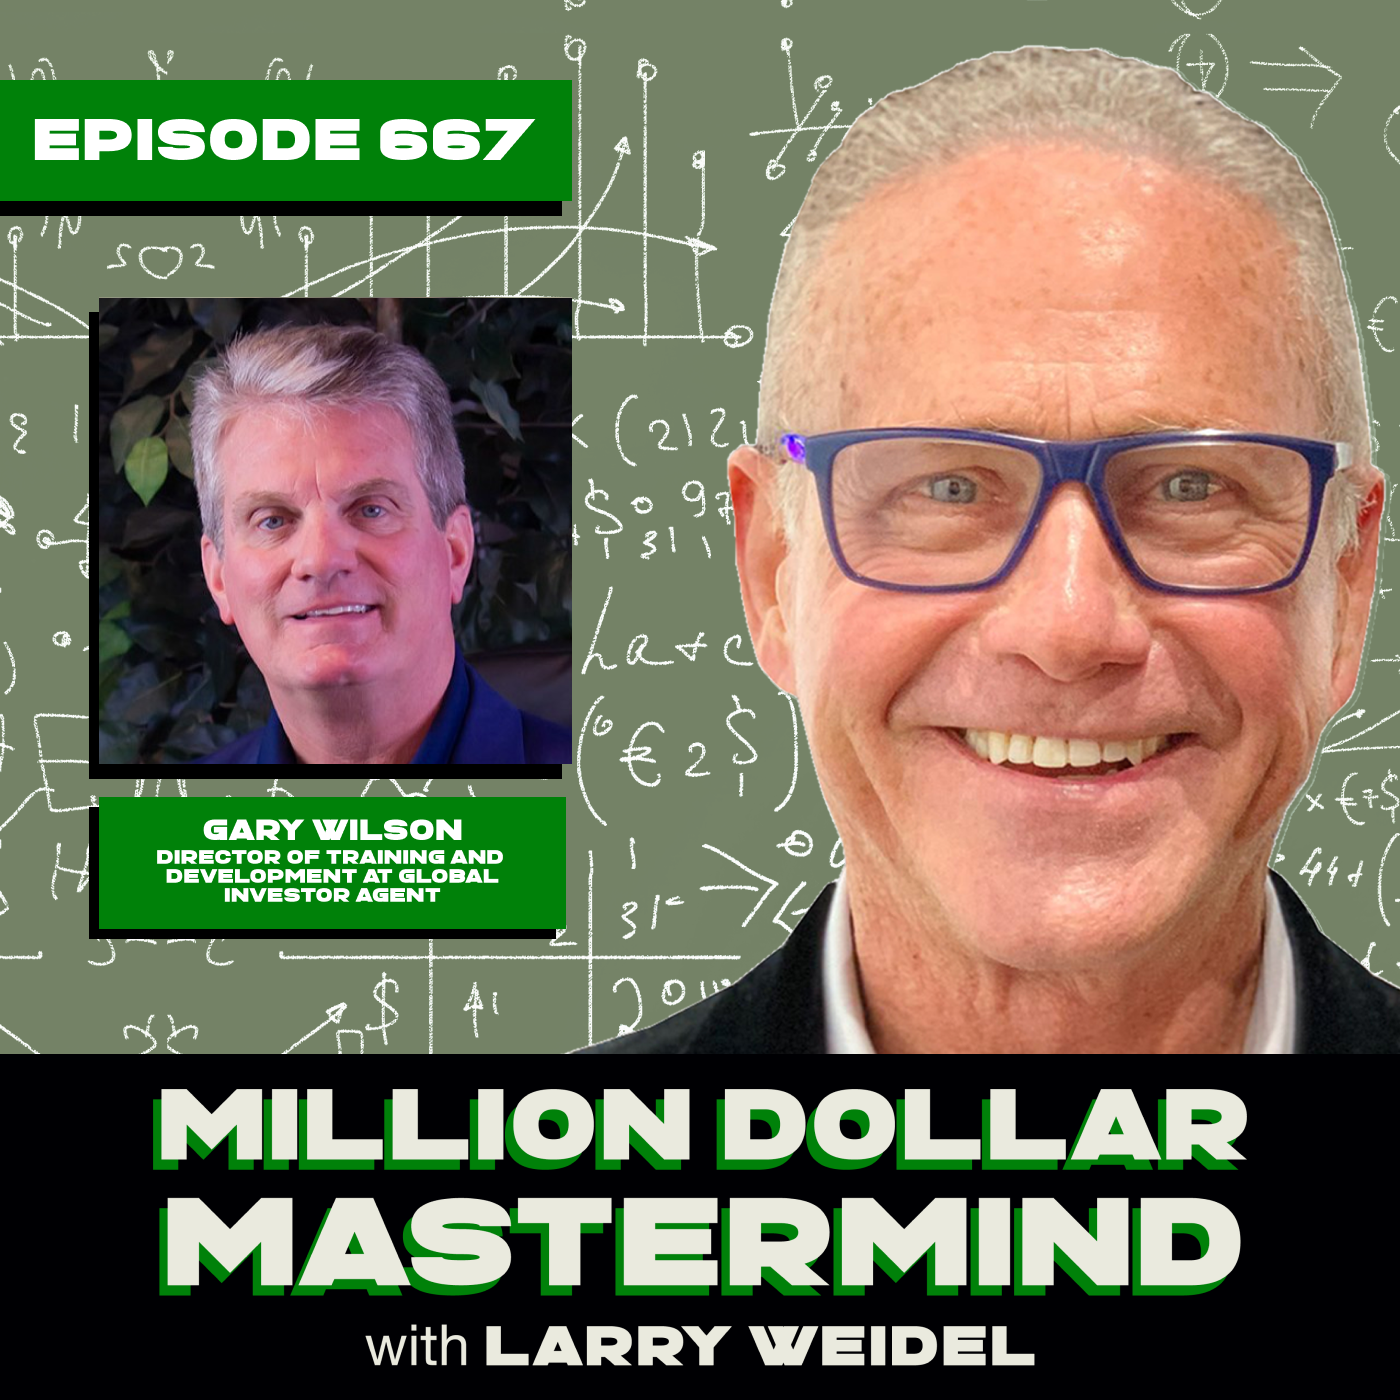 Episode #667 - The Winning Formula with Gary Wilson, Founder of Global Investor Agent